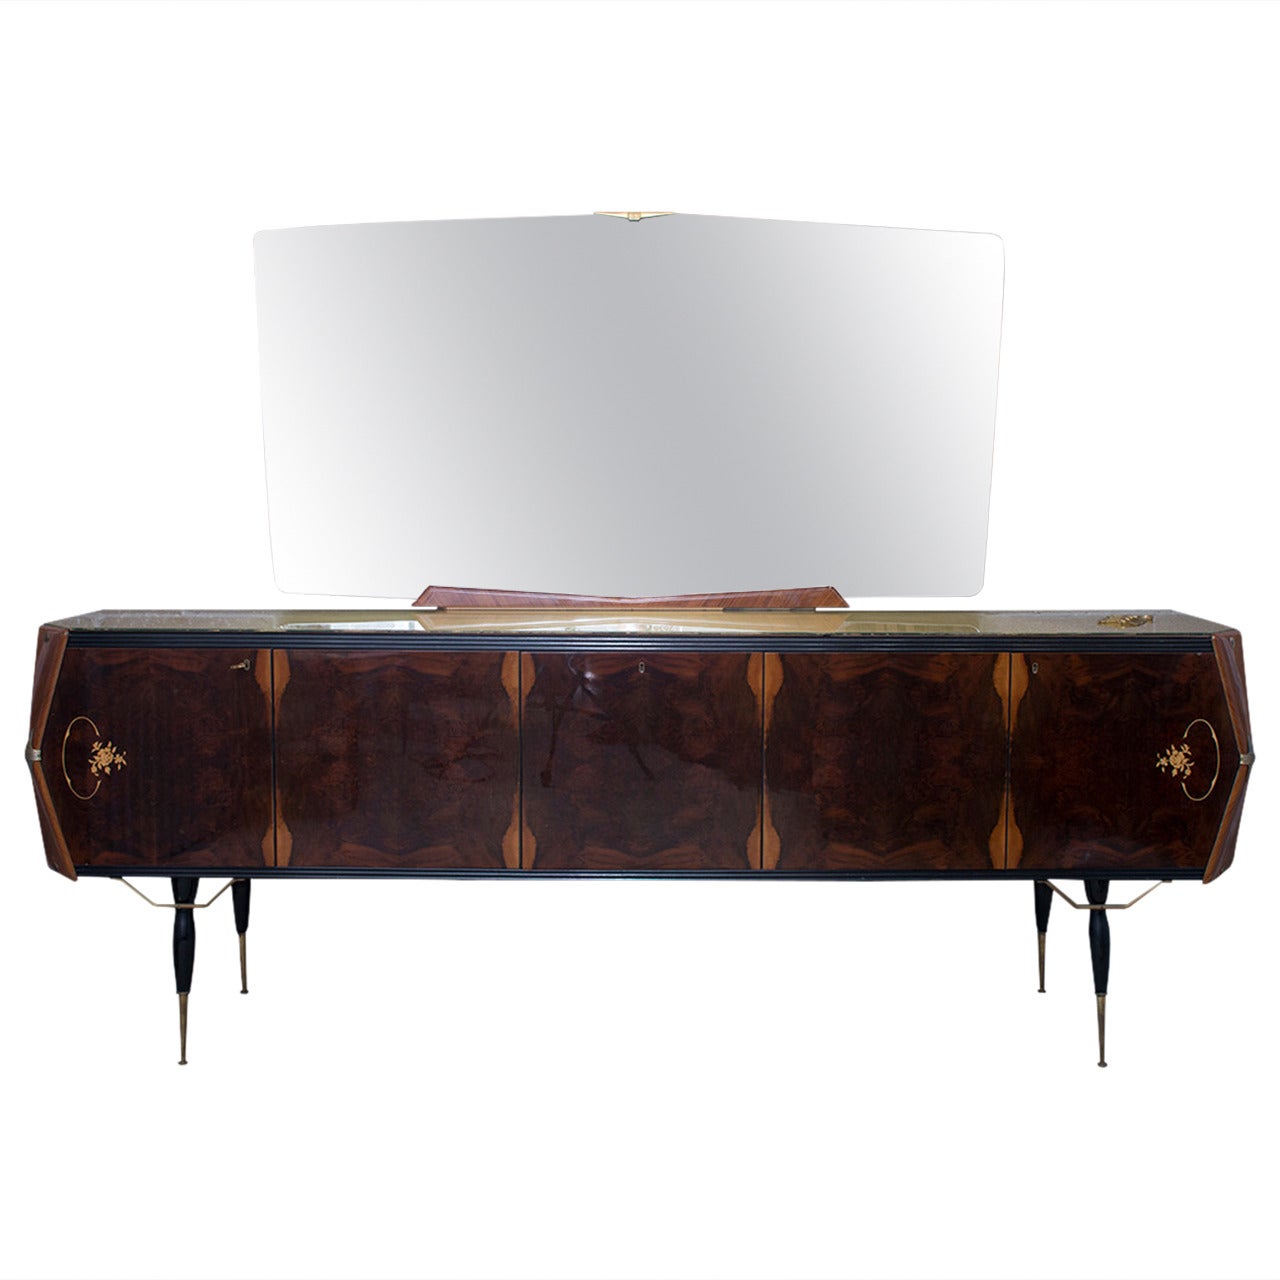 Italian Midcentury Sideboard with Inlaid Brass Accents and Large Mirror